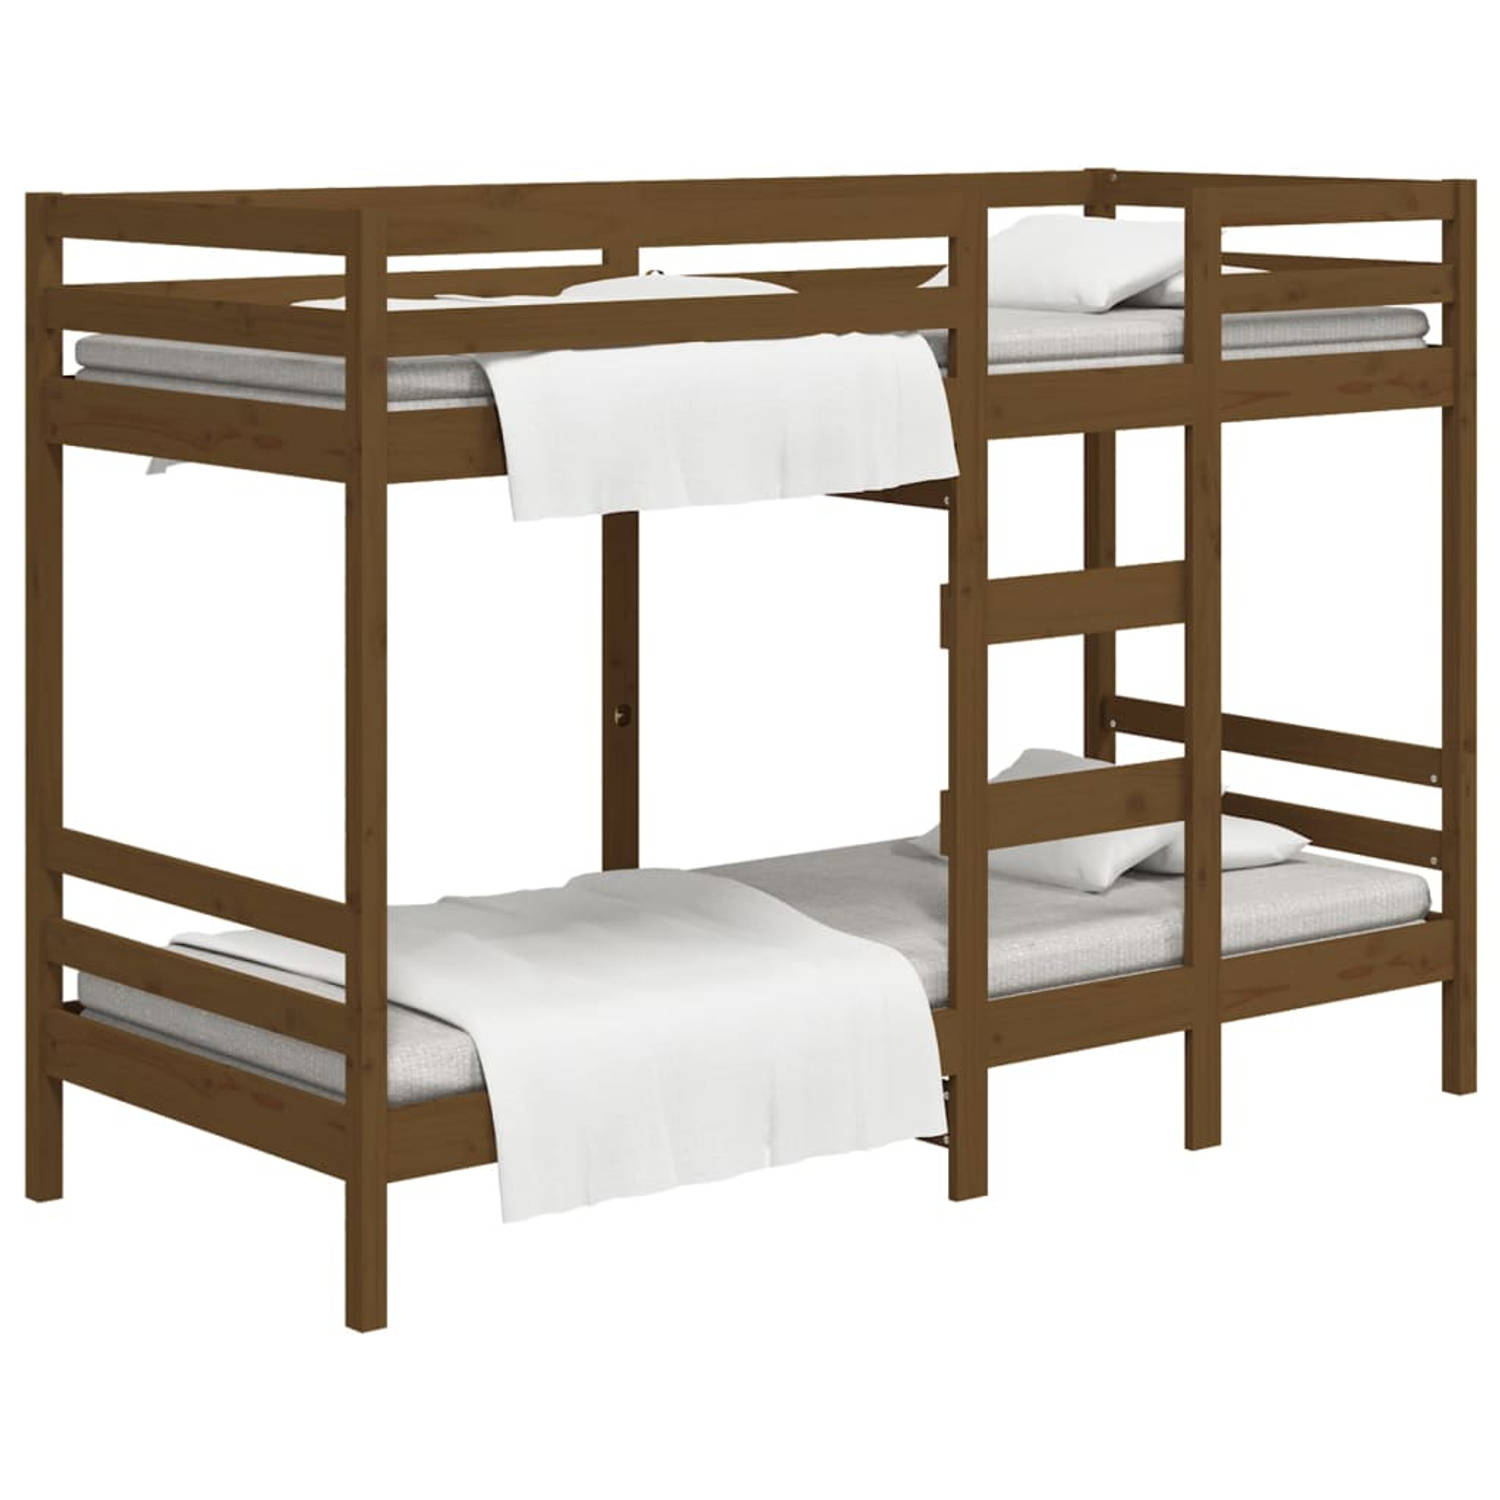 The Living Store Stapelbed massief grenenhout honingbruin 90x190 cm - Bed